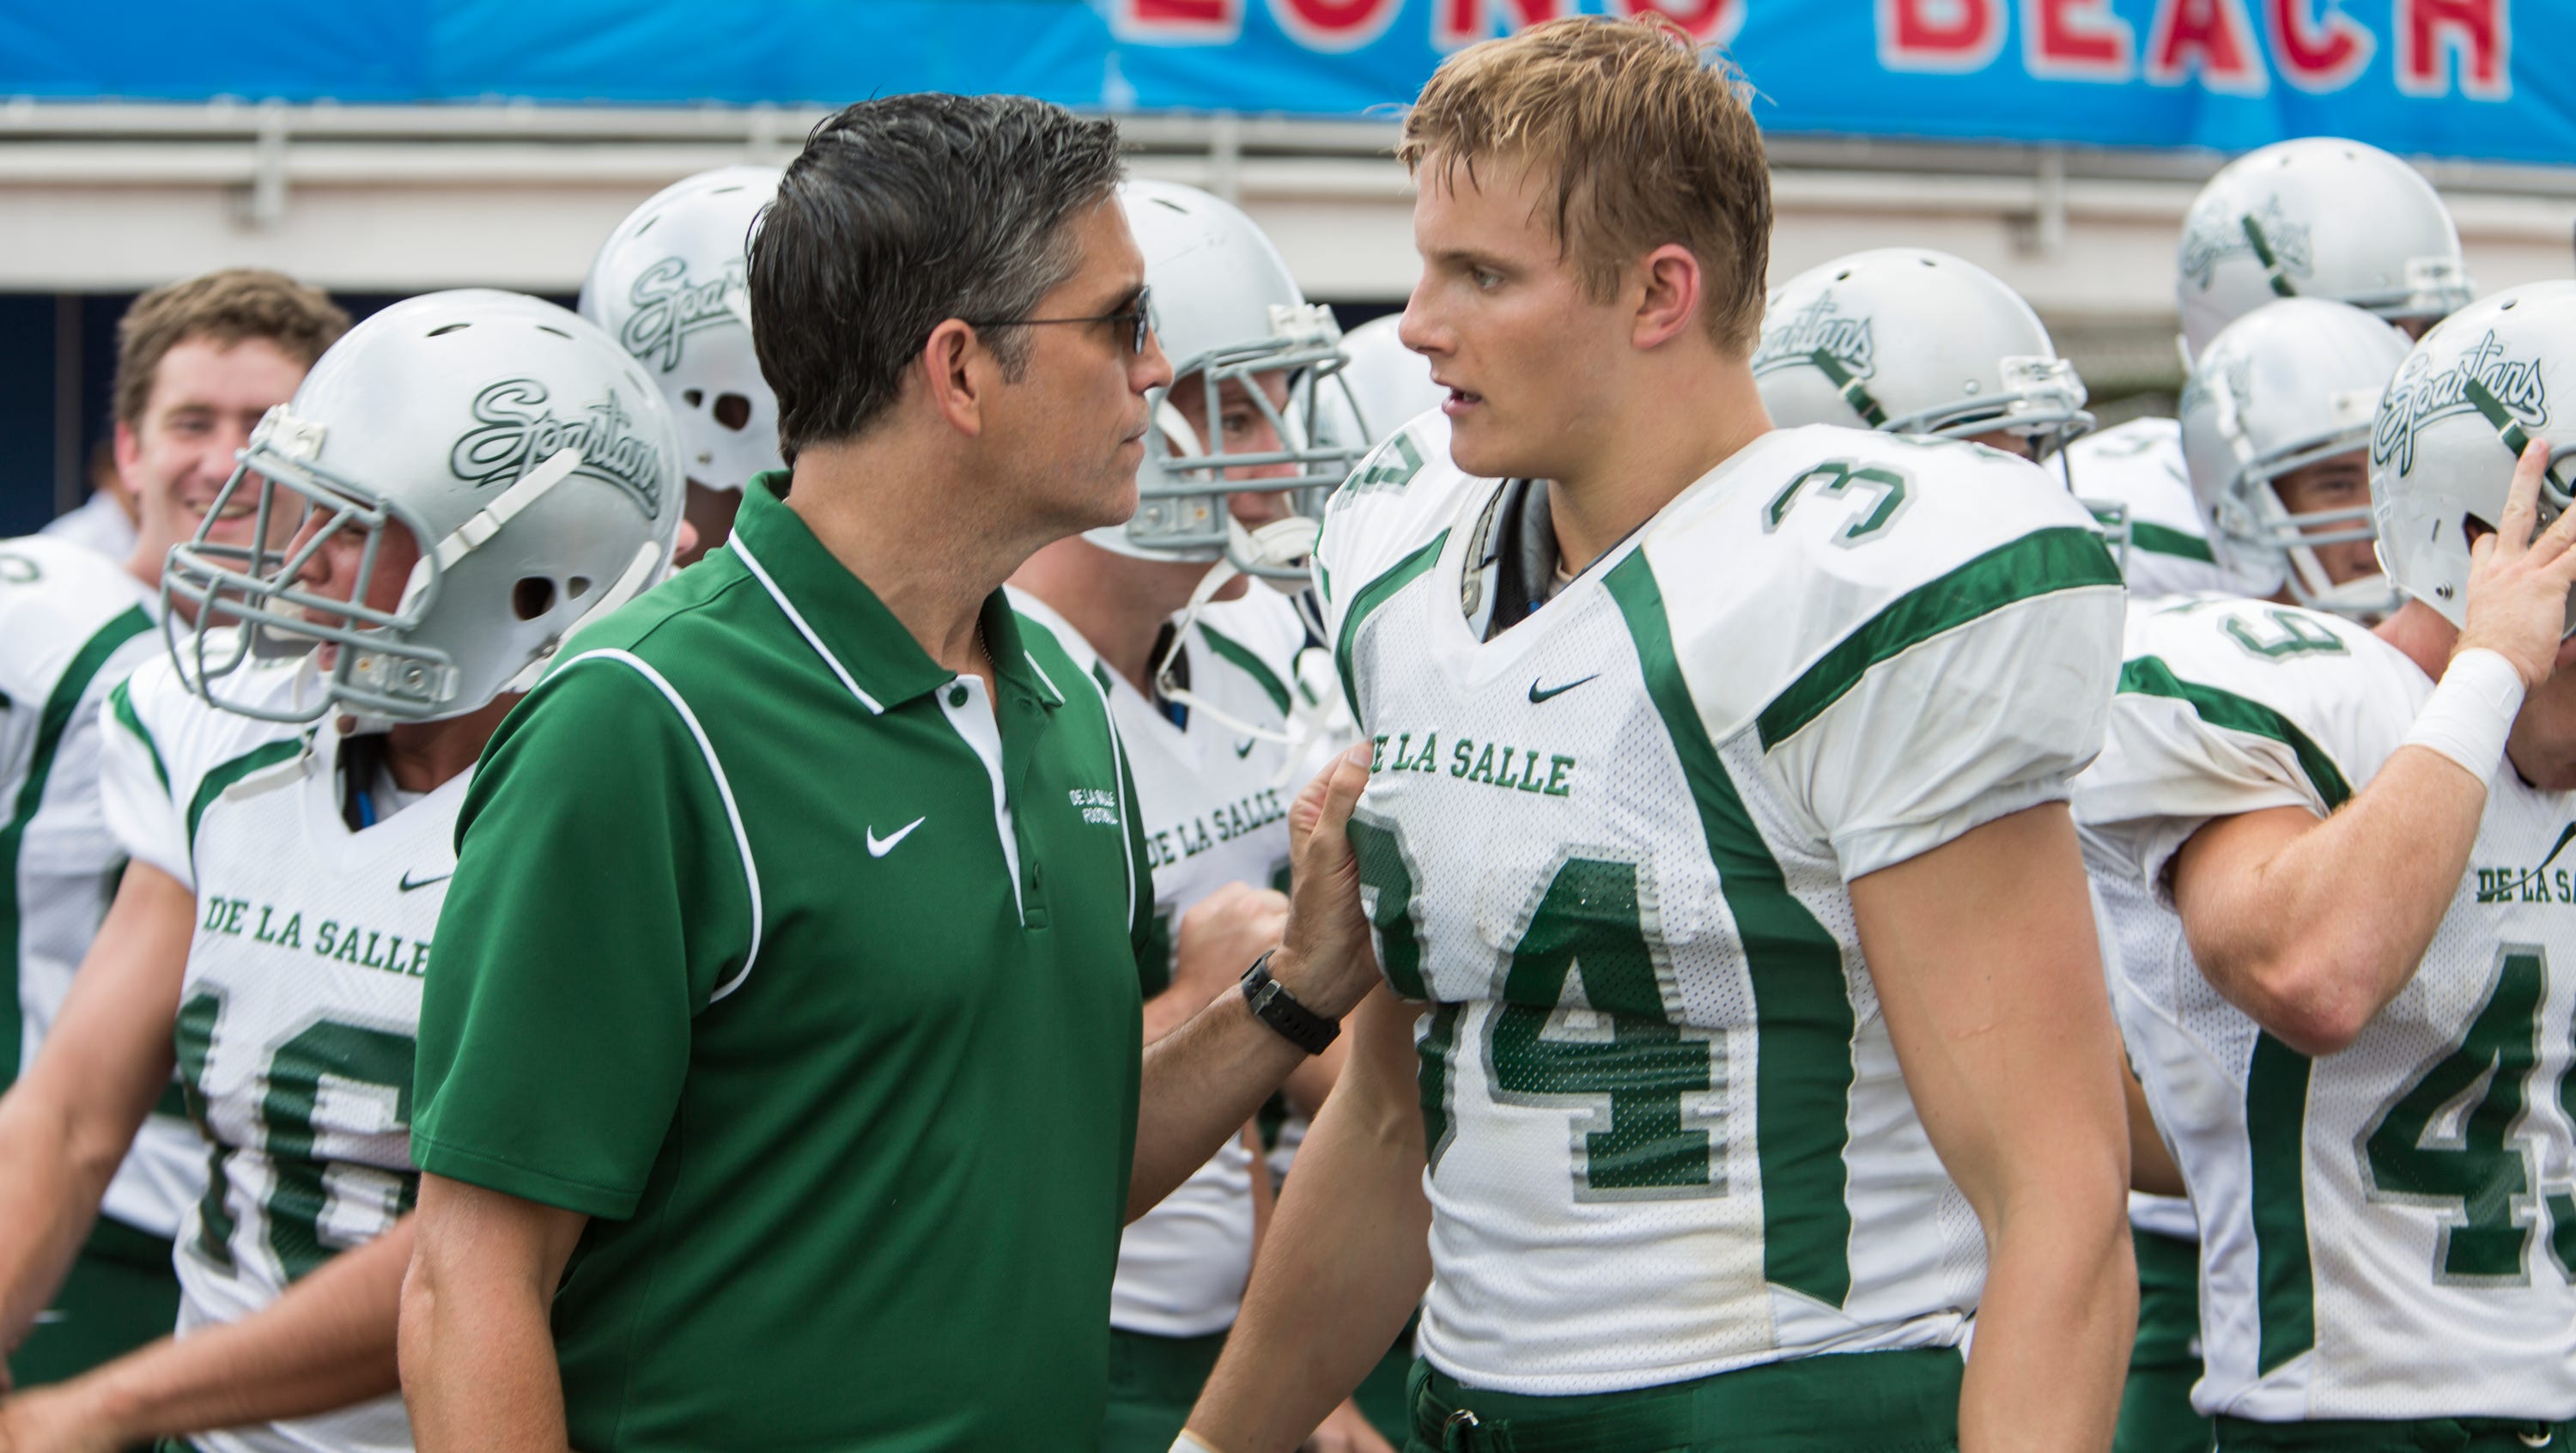 'When the Game Stands Tall' good for teens